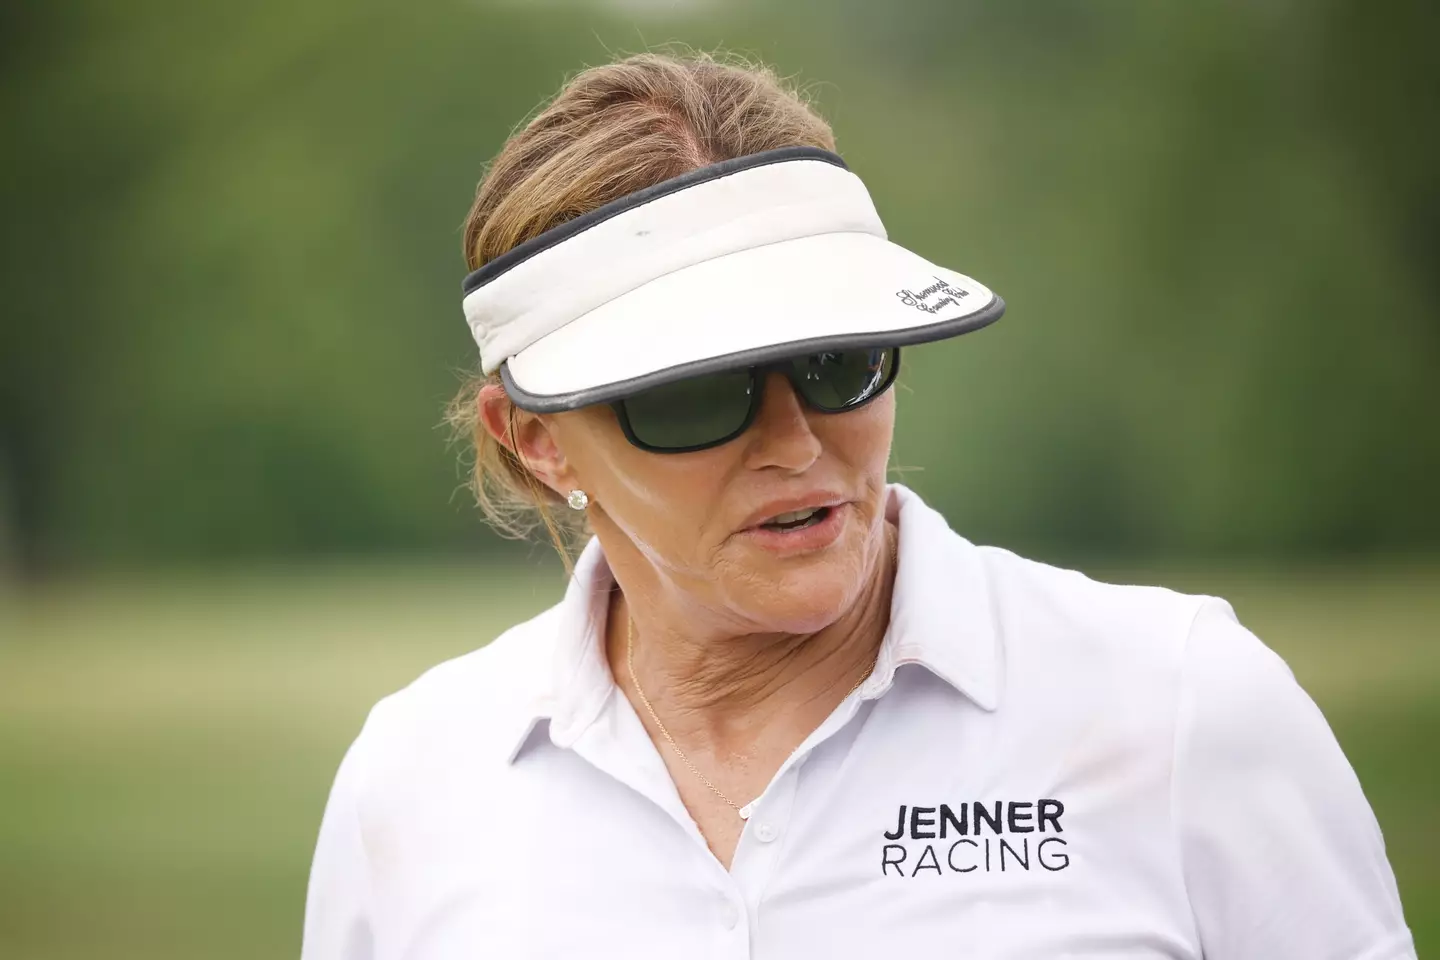 The former Olympian enjoys golf in her free time.